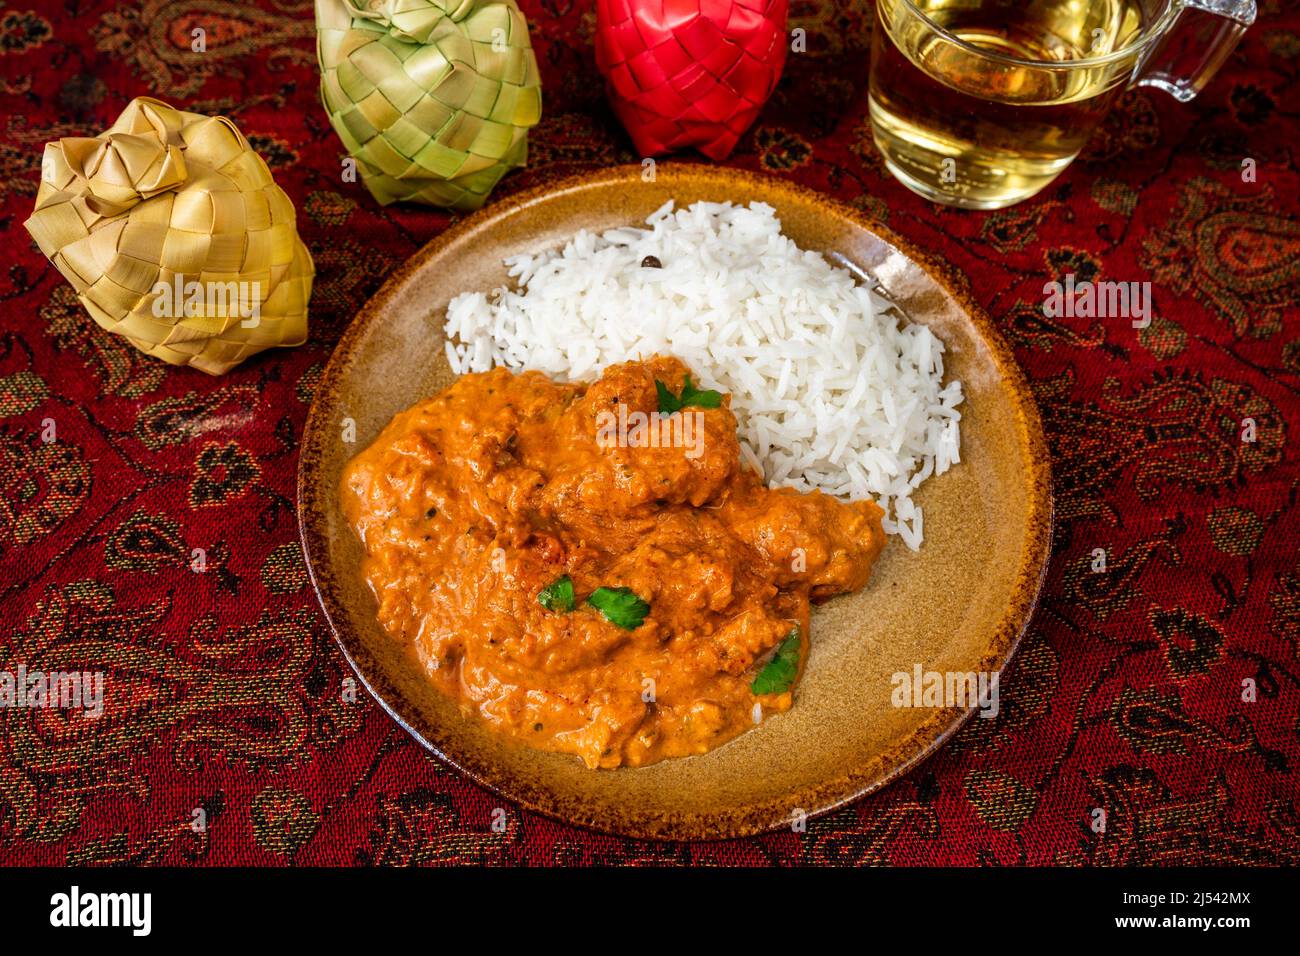 Chicken tikka masala with rice on plate, 3 bamboo spice box, cup of tea on red table-cloth. Indian lunch or dinner, closeup. Stock Photo